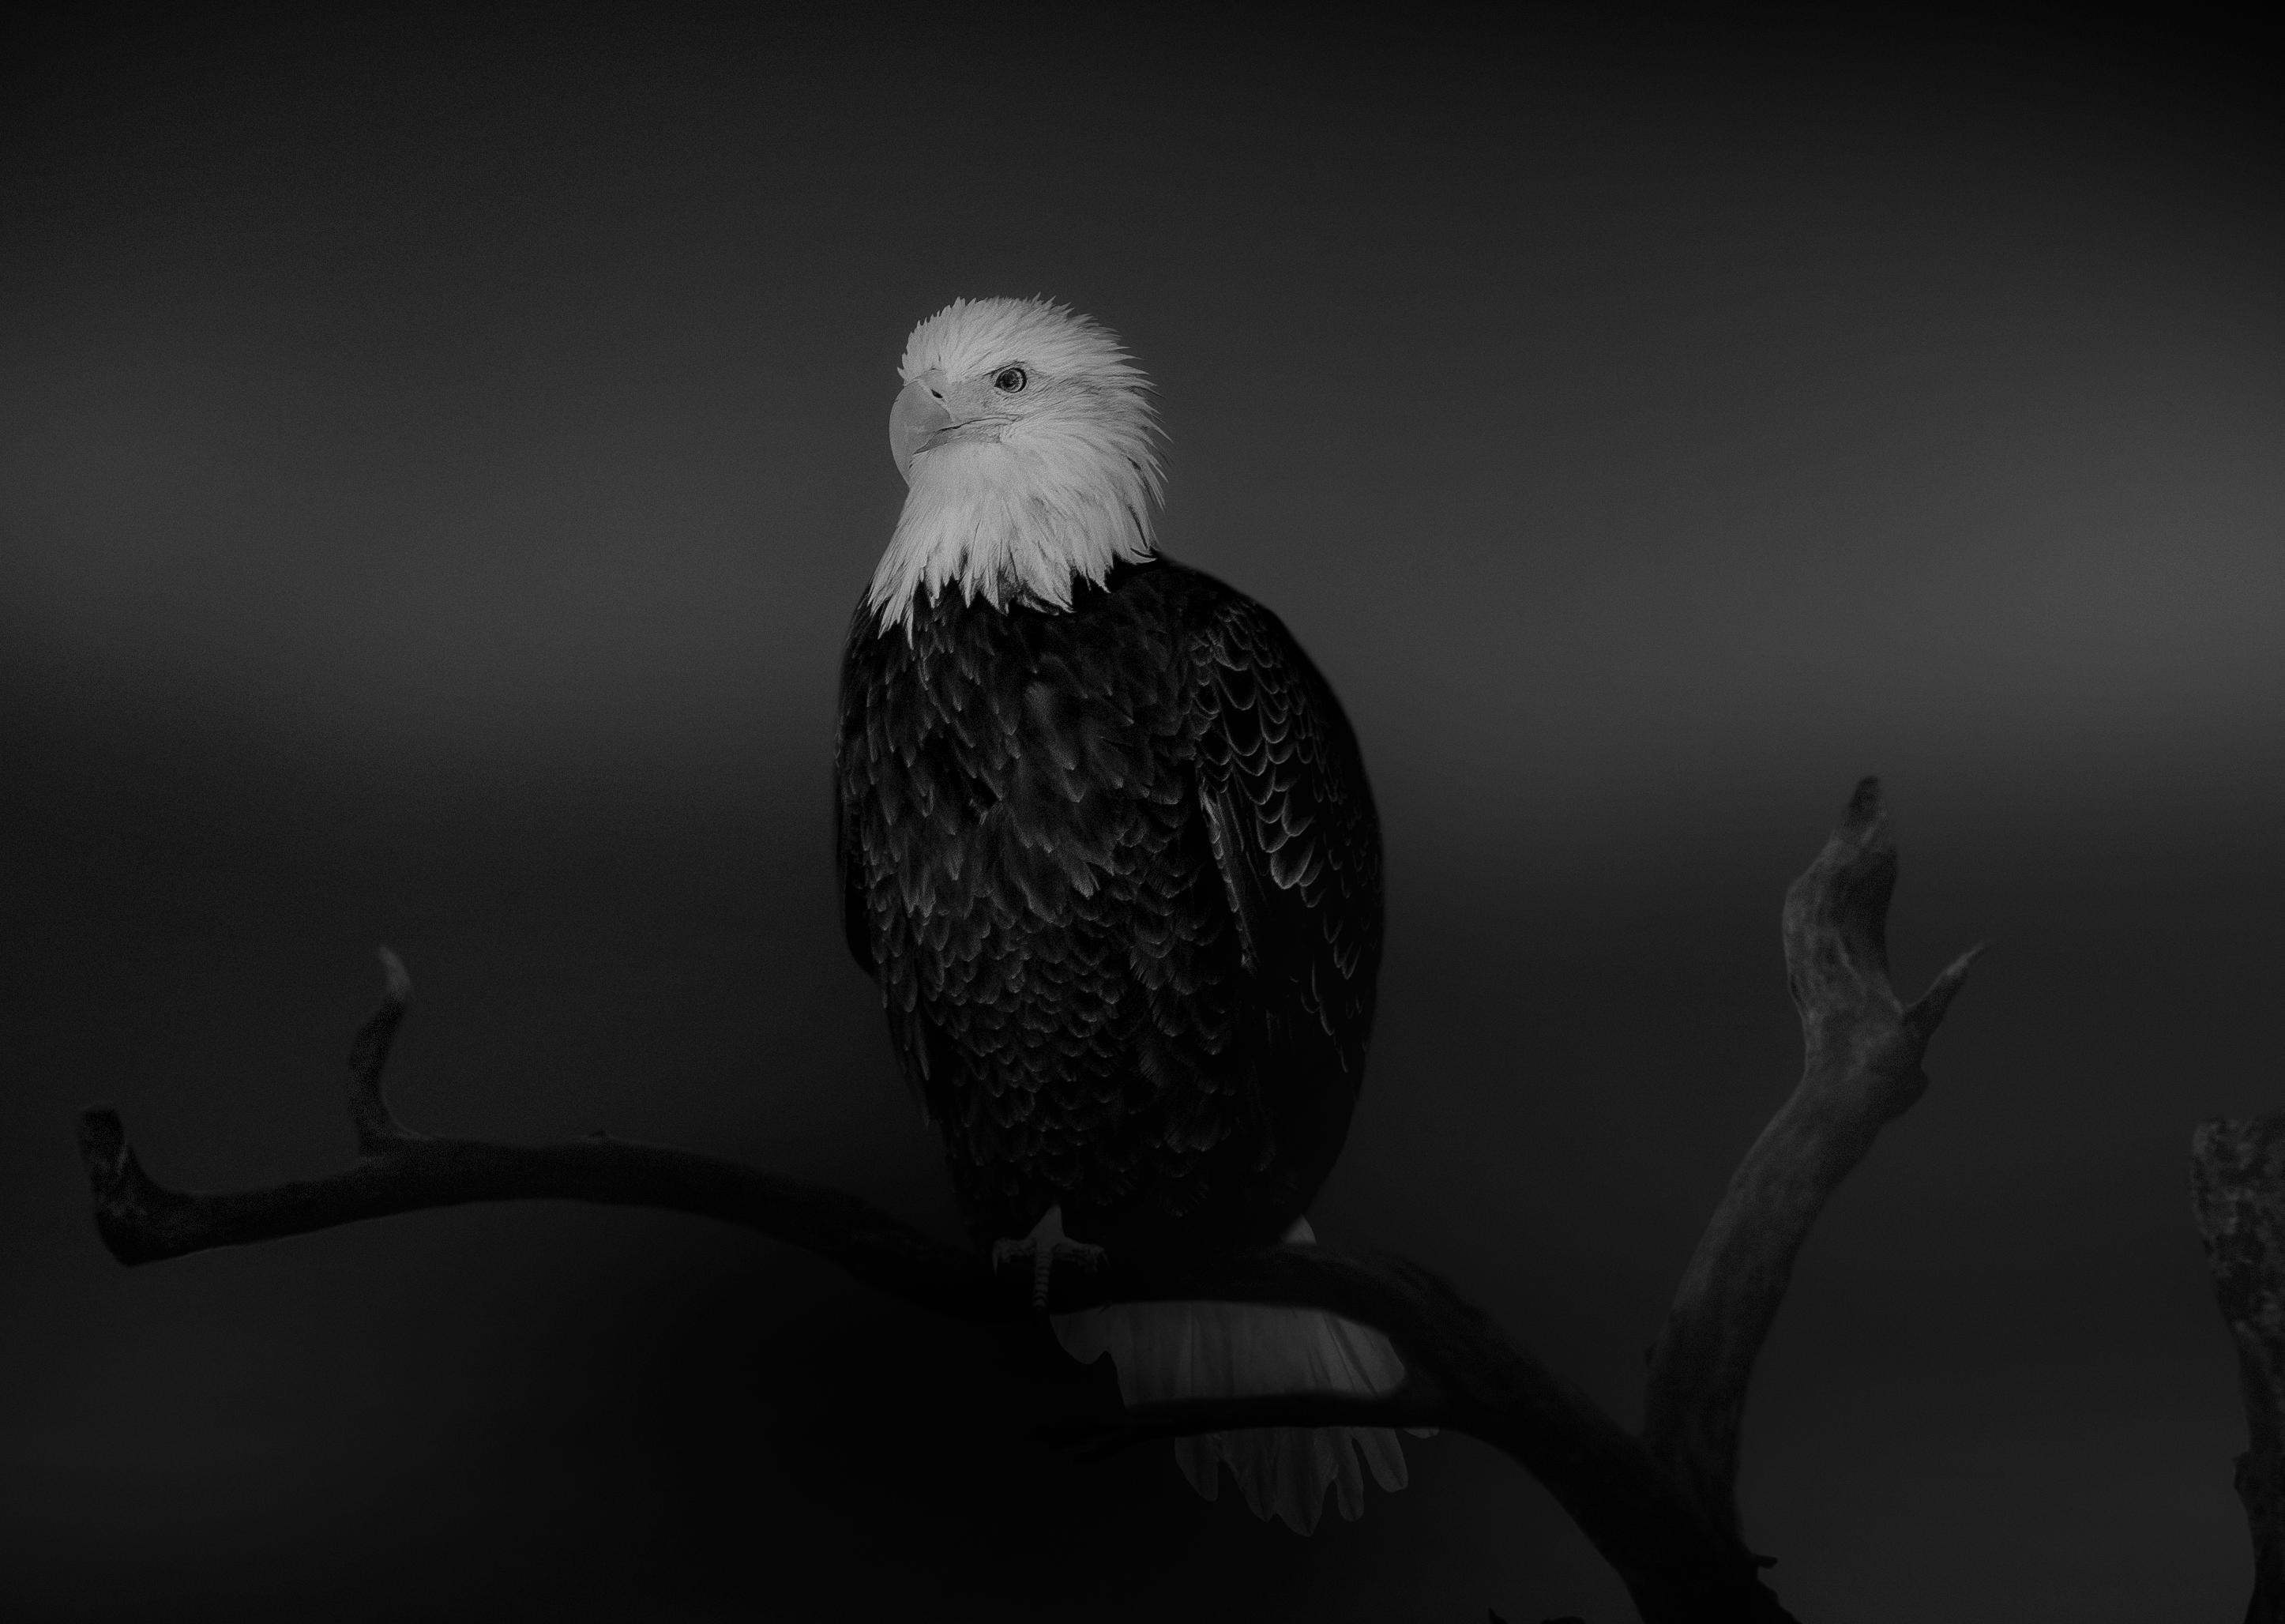 "Bald Eagle" 36x48 - Black & White Photography, Photograph Unsigned Test Print